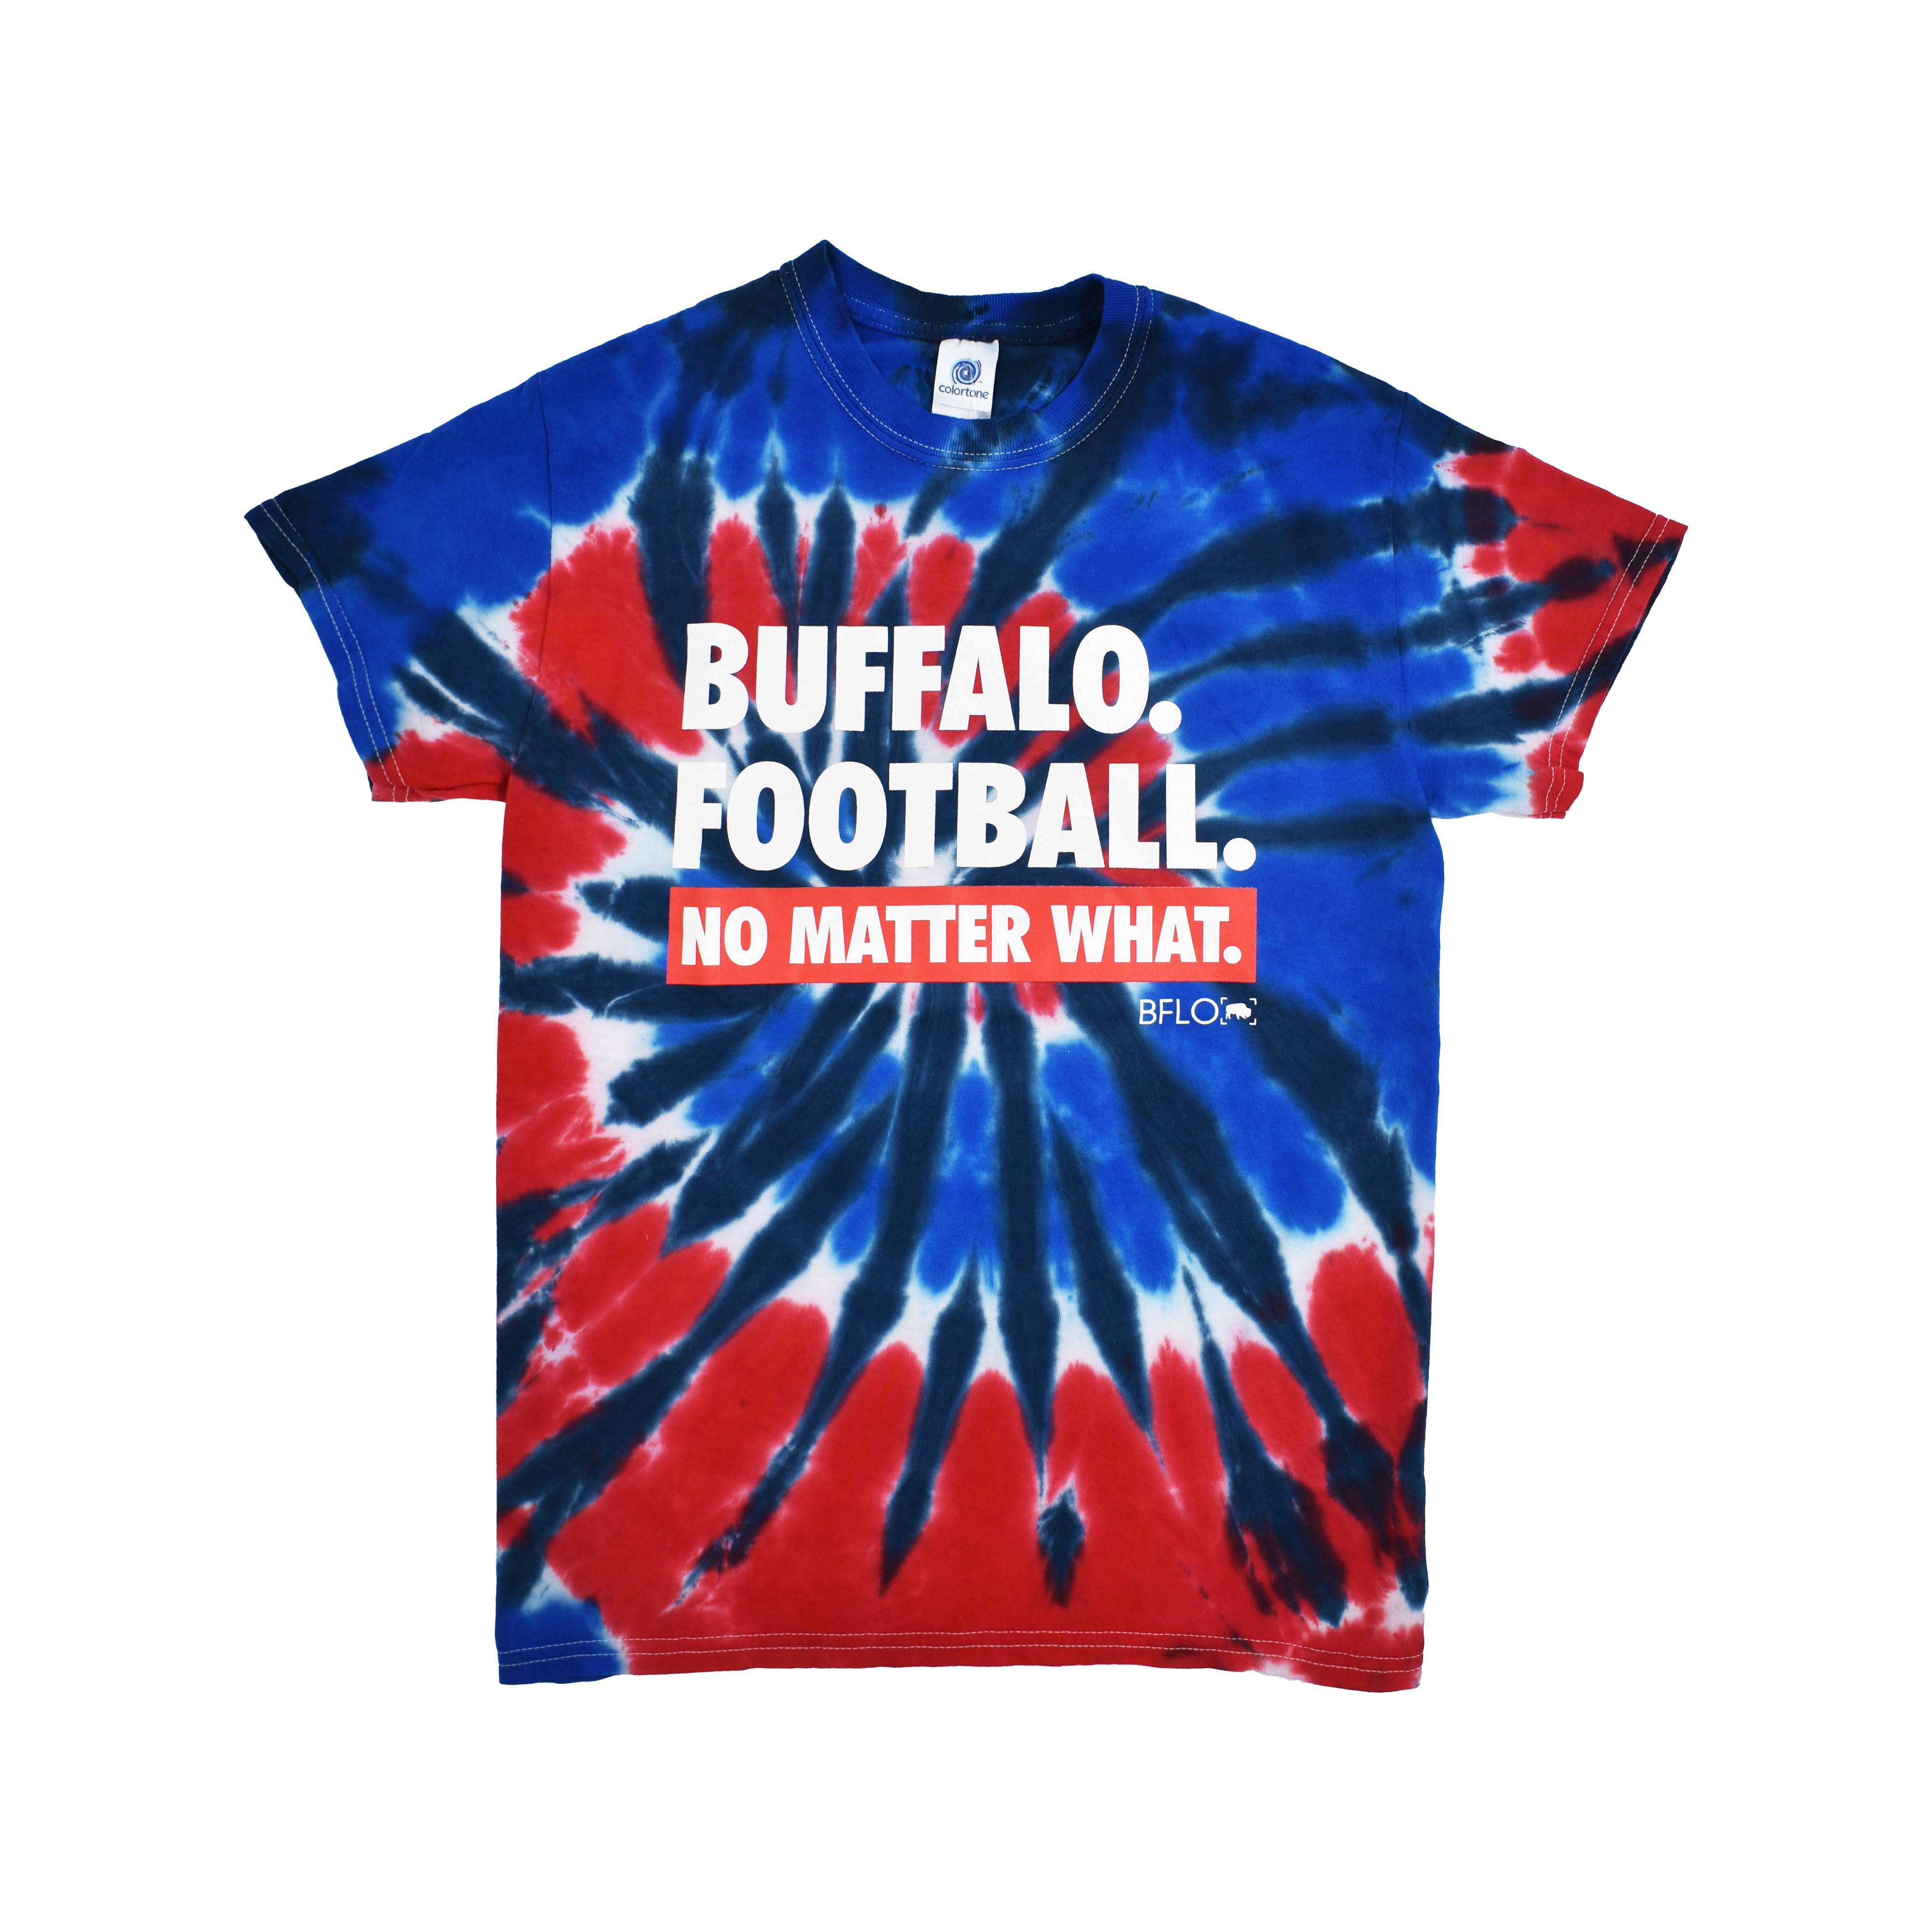 Red, White, and Blue Tie Dye Buffalo Football T-Shirt